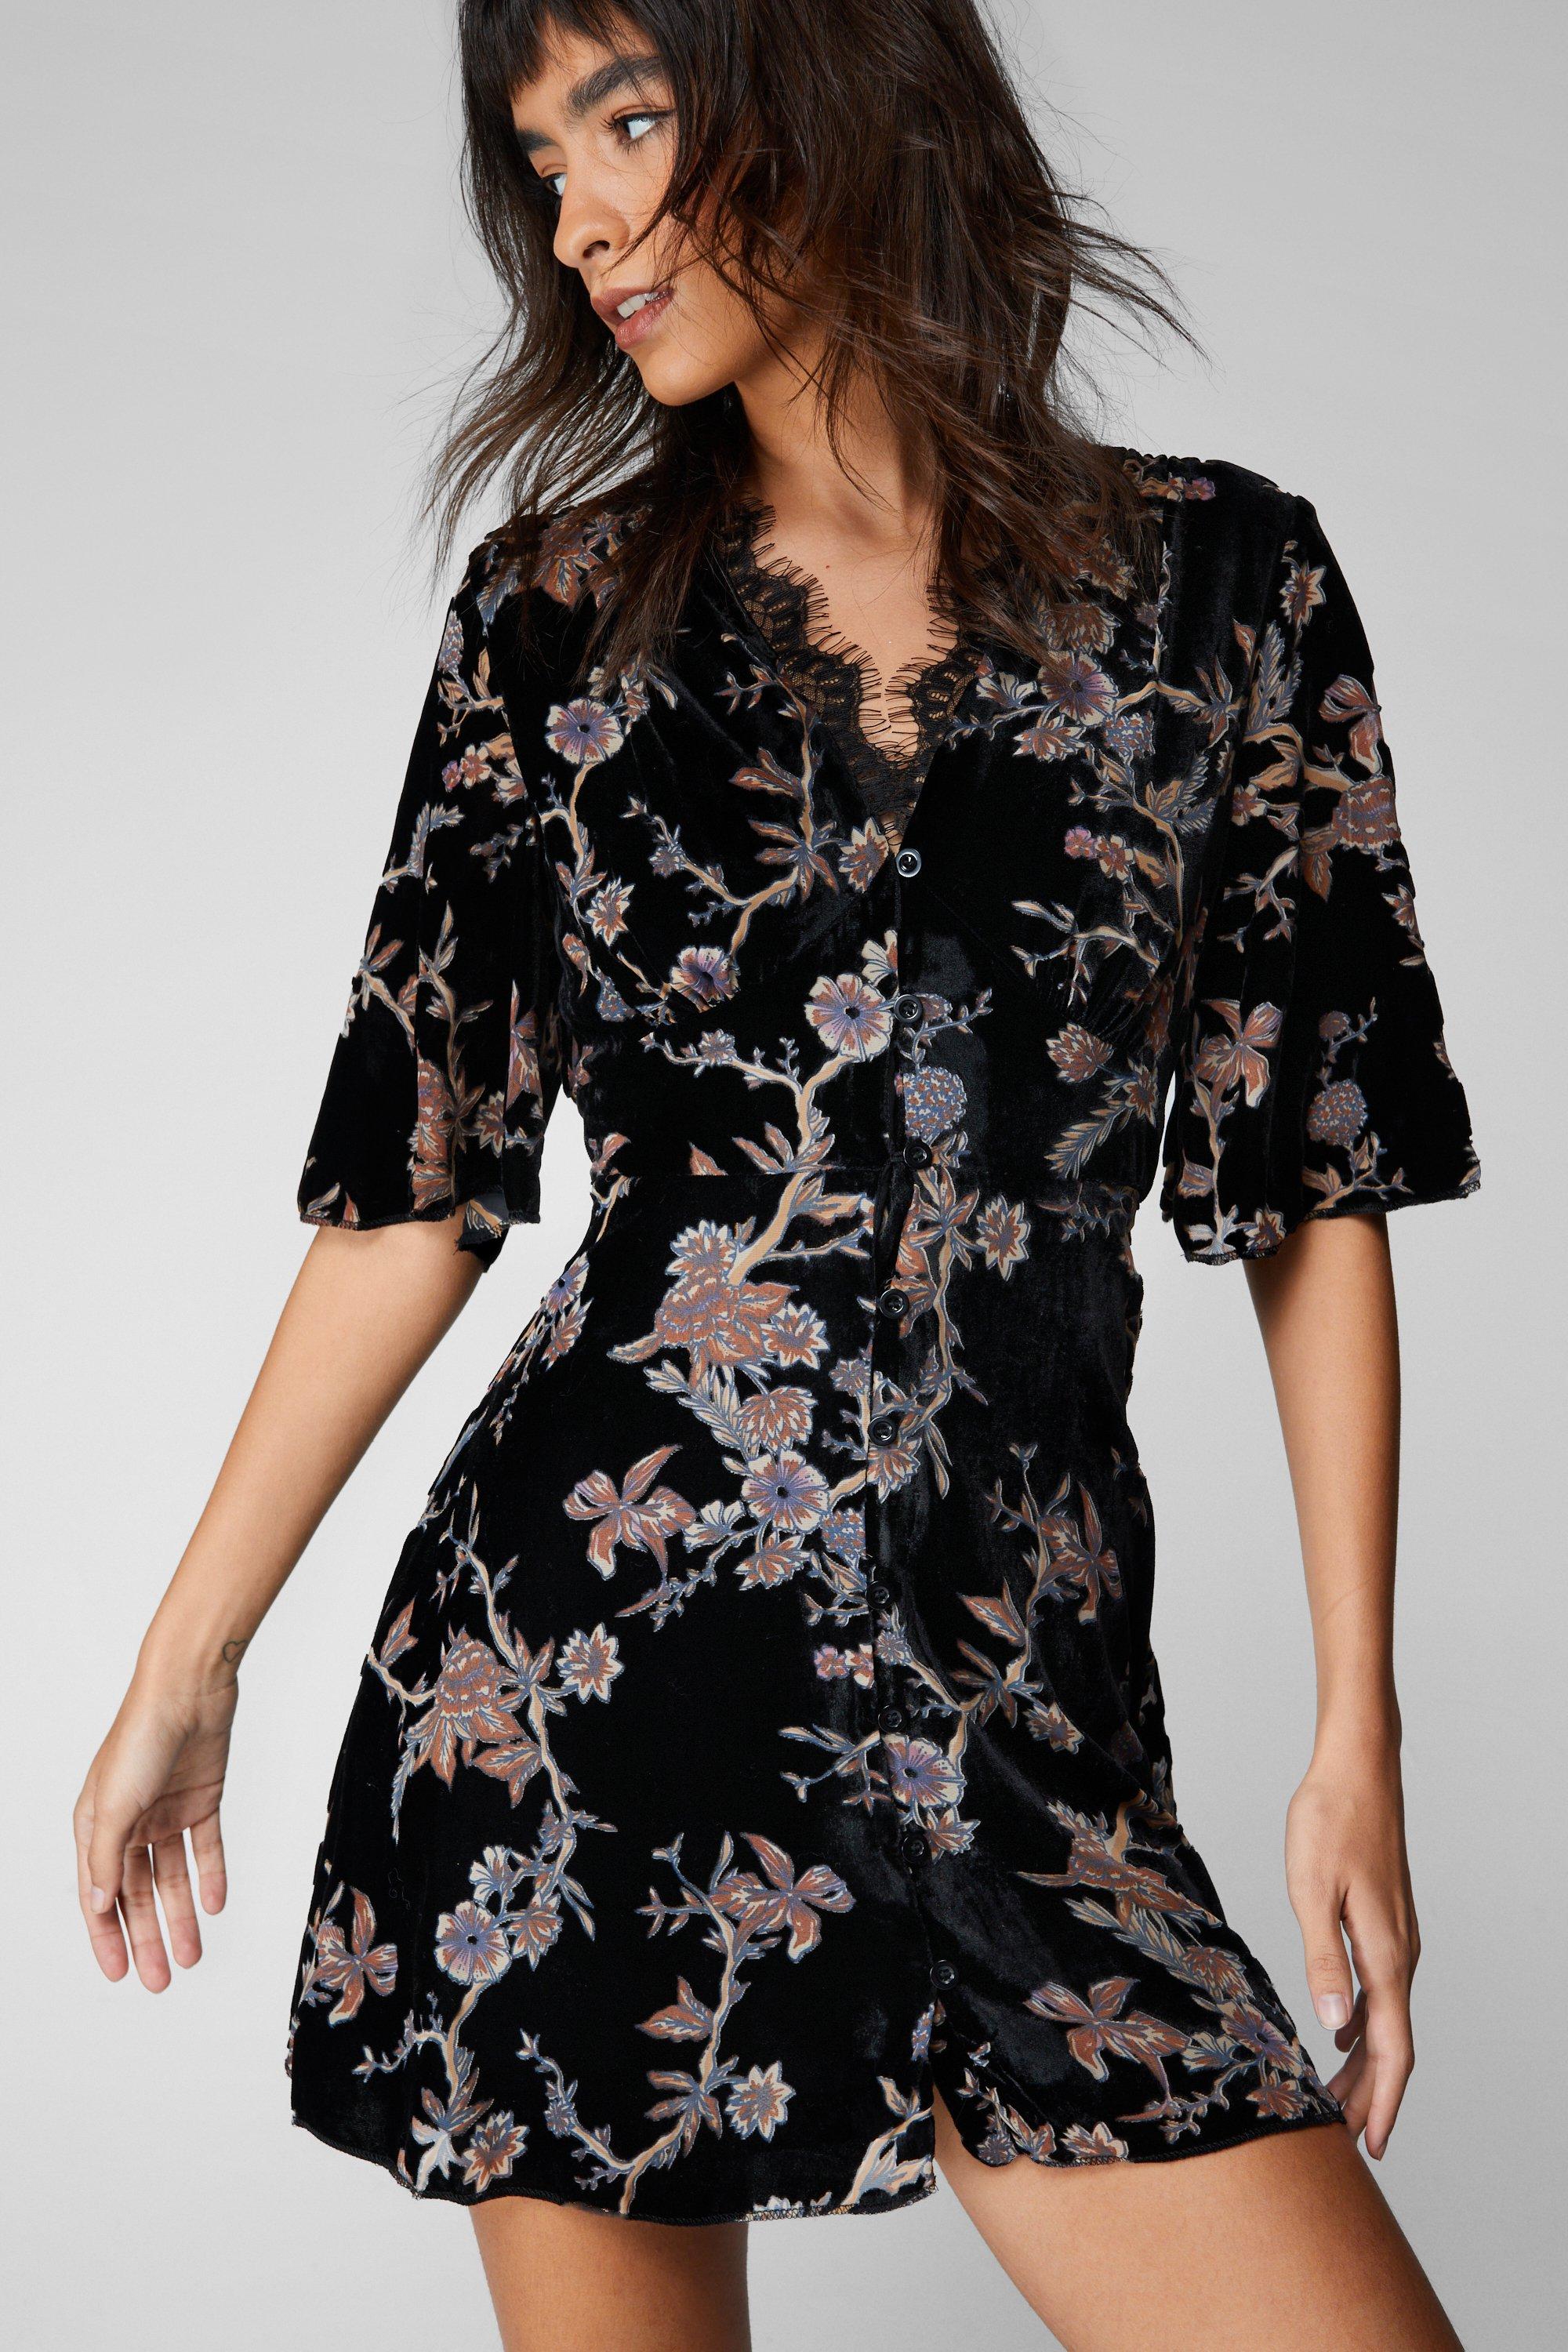 Lace Collar Floral Dress, DABAGIRL, Your Style Maker